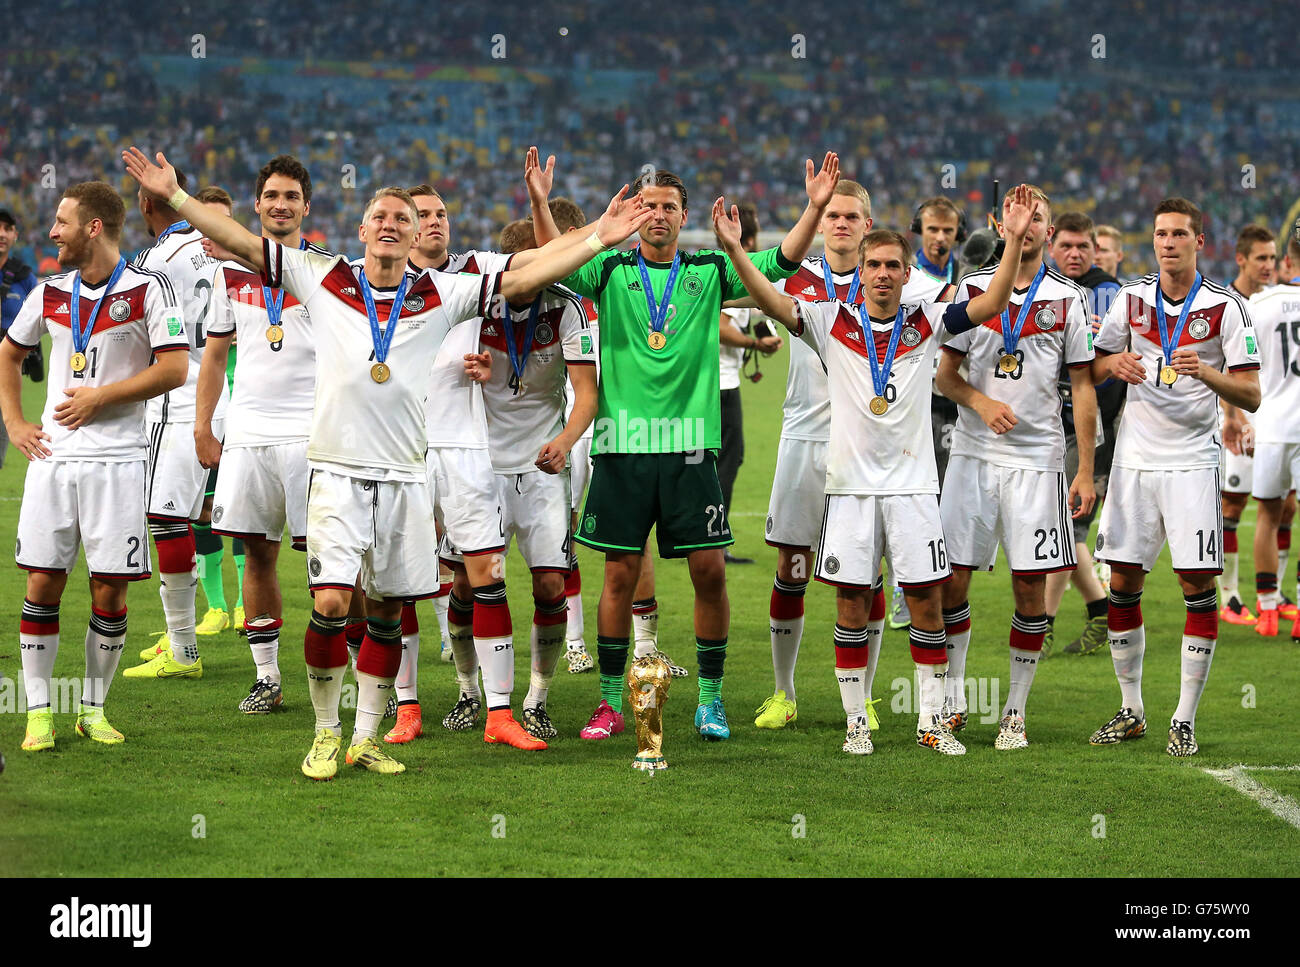 Soccer - FIFA World Cup 2014 - Final - Germany v Argentina - Estadio do Maracana. Germany's Bastian Schweinsteiger (third left) leads the celebrations after victory in the FIFA World Cup Final Stock Photo